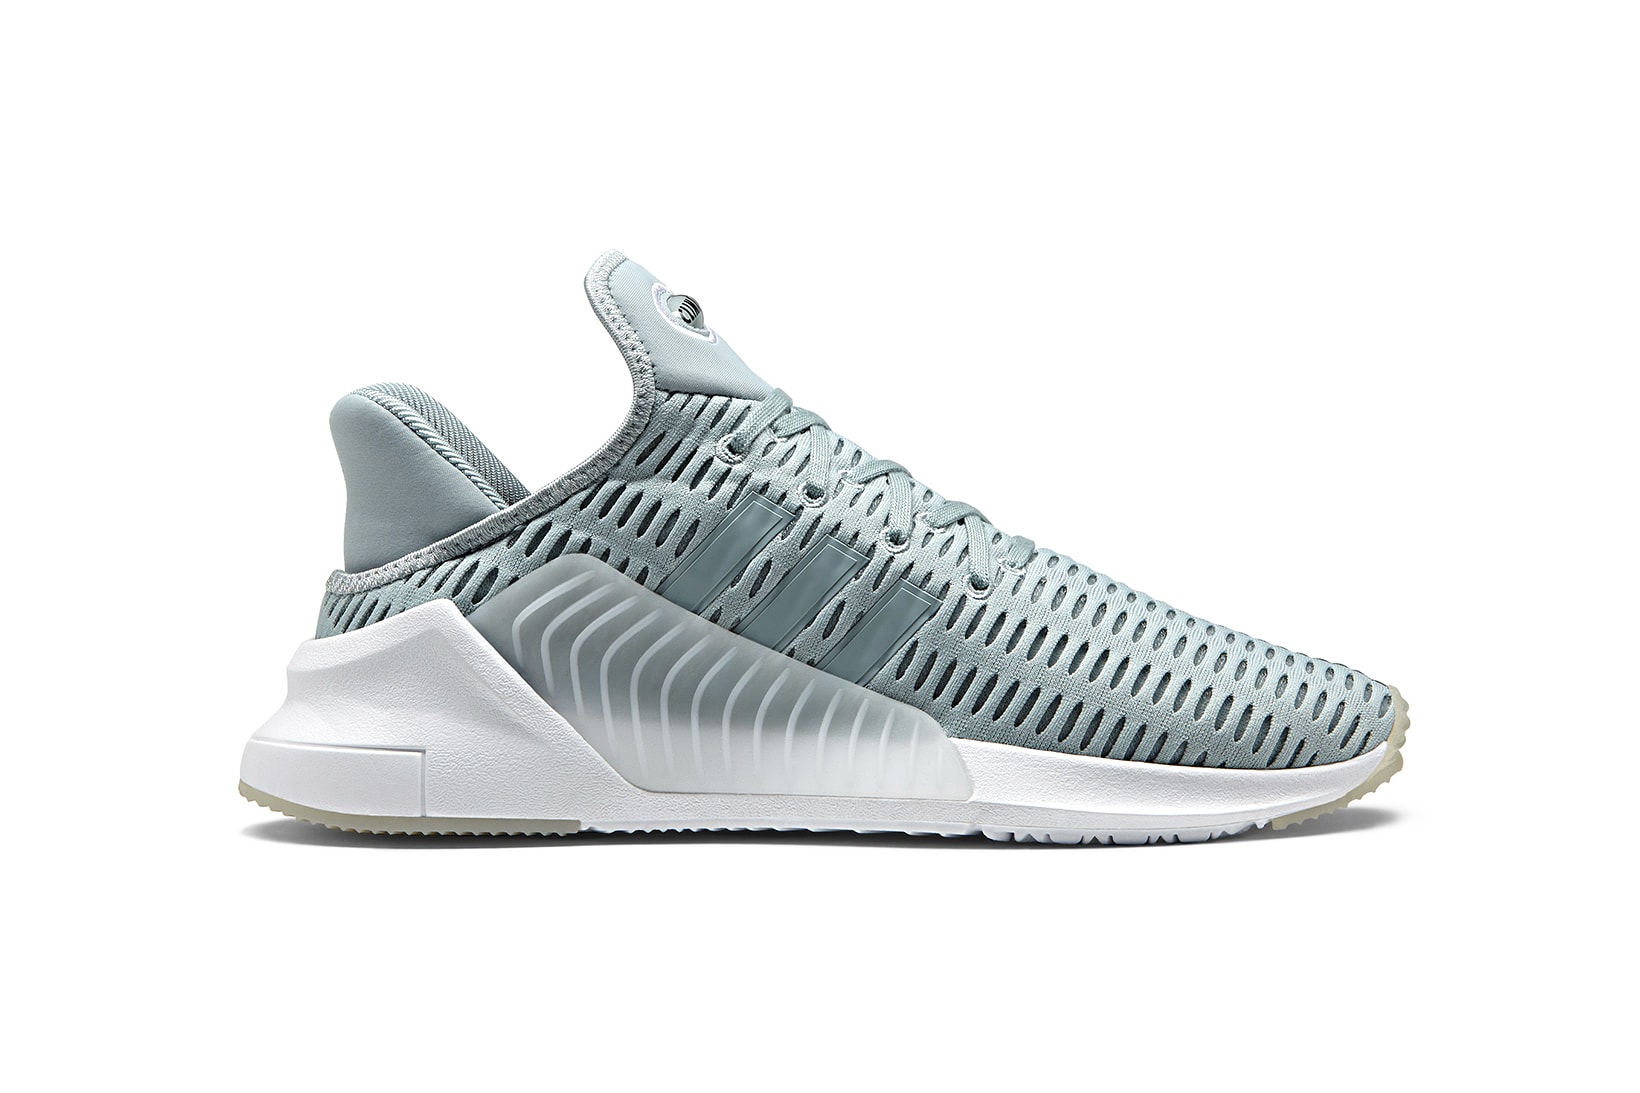 adidas ClimaCool 02 17 White Tactile Green Sneakers Shoes Footwear Summer 2017 August 10 Release Date Info